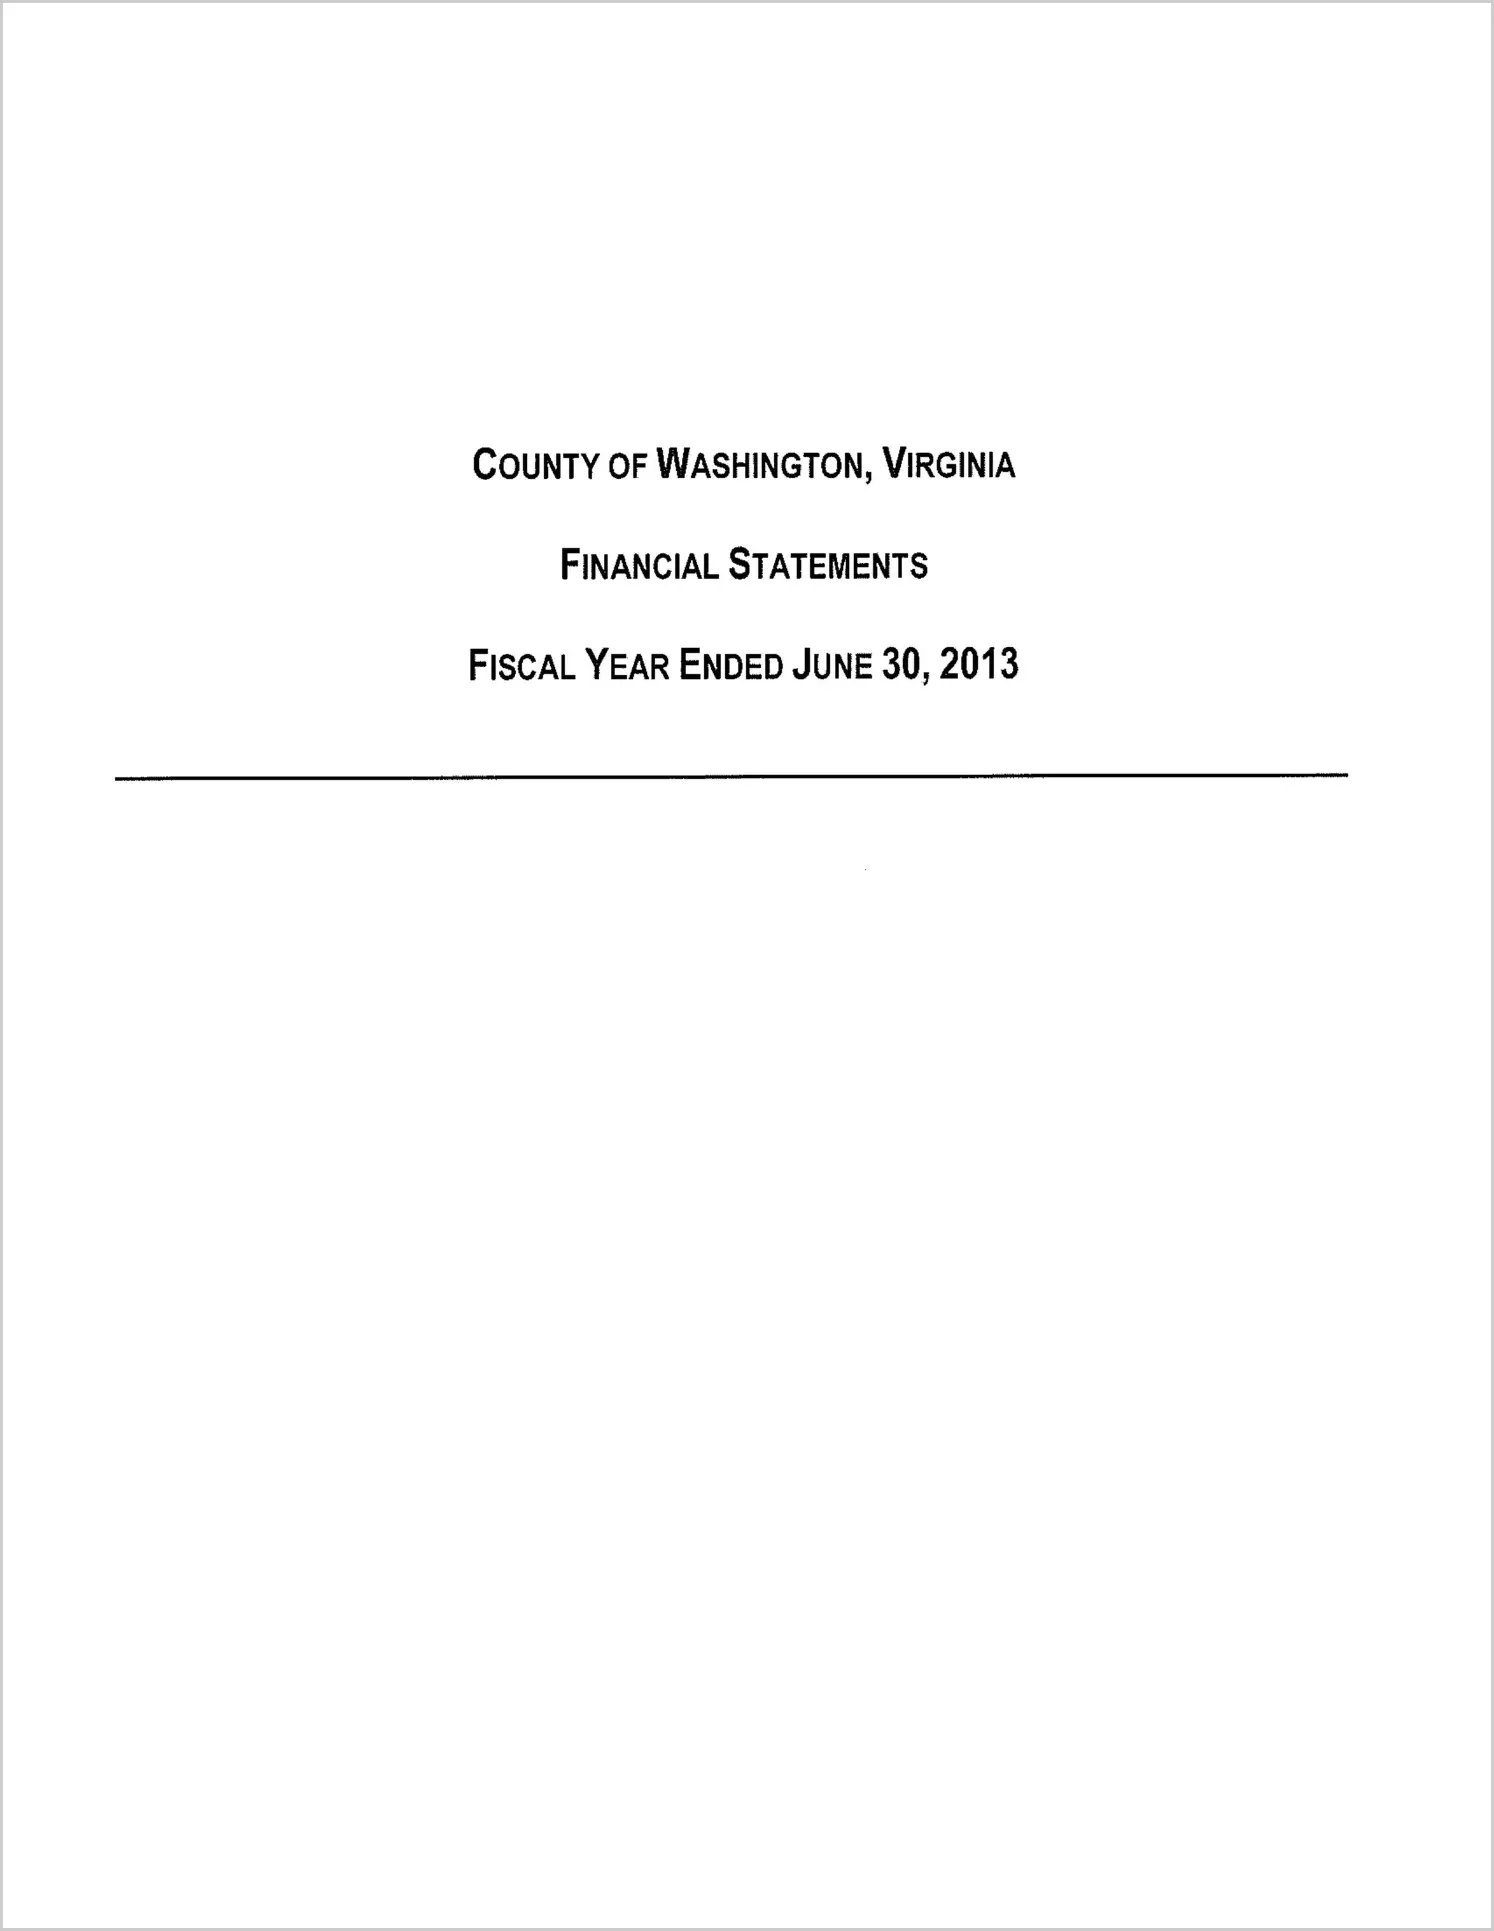 2013 Annual Financial Report for County of Washington